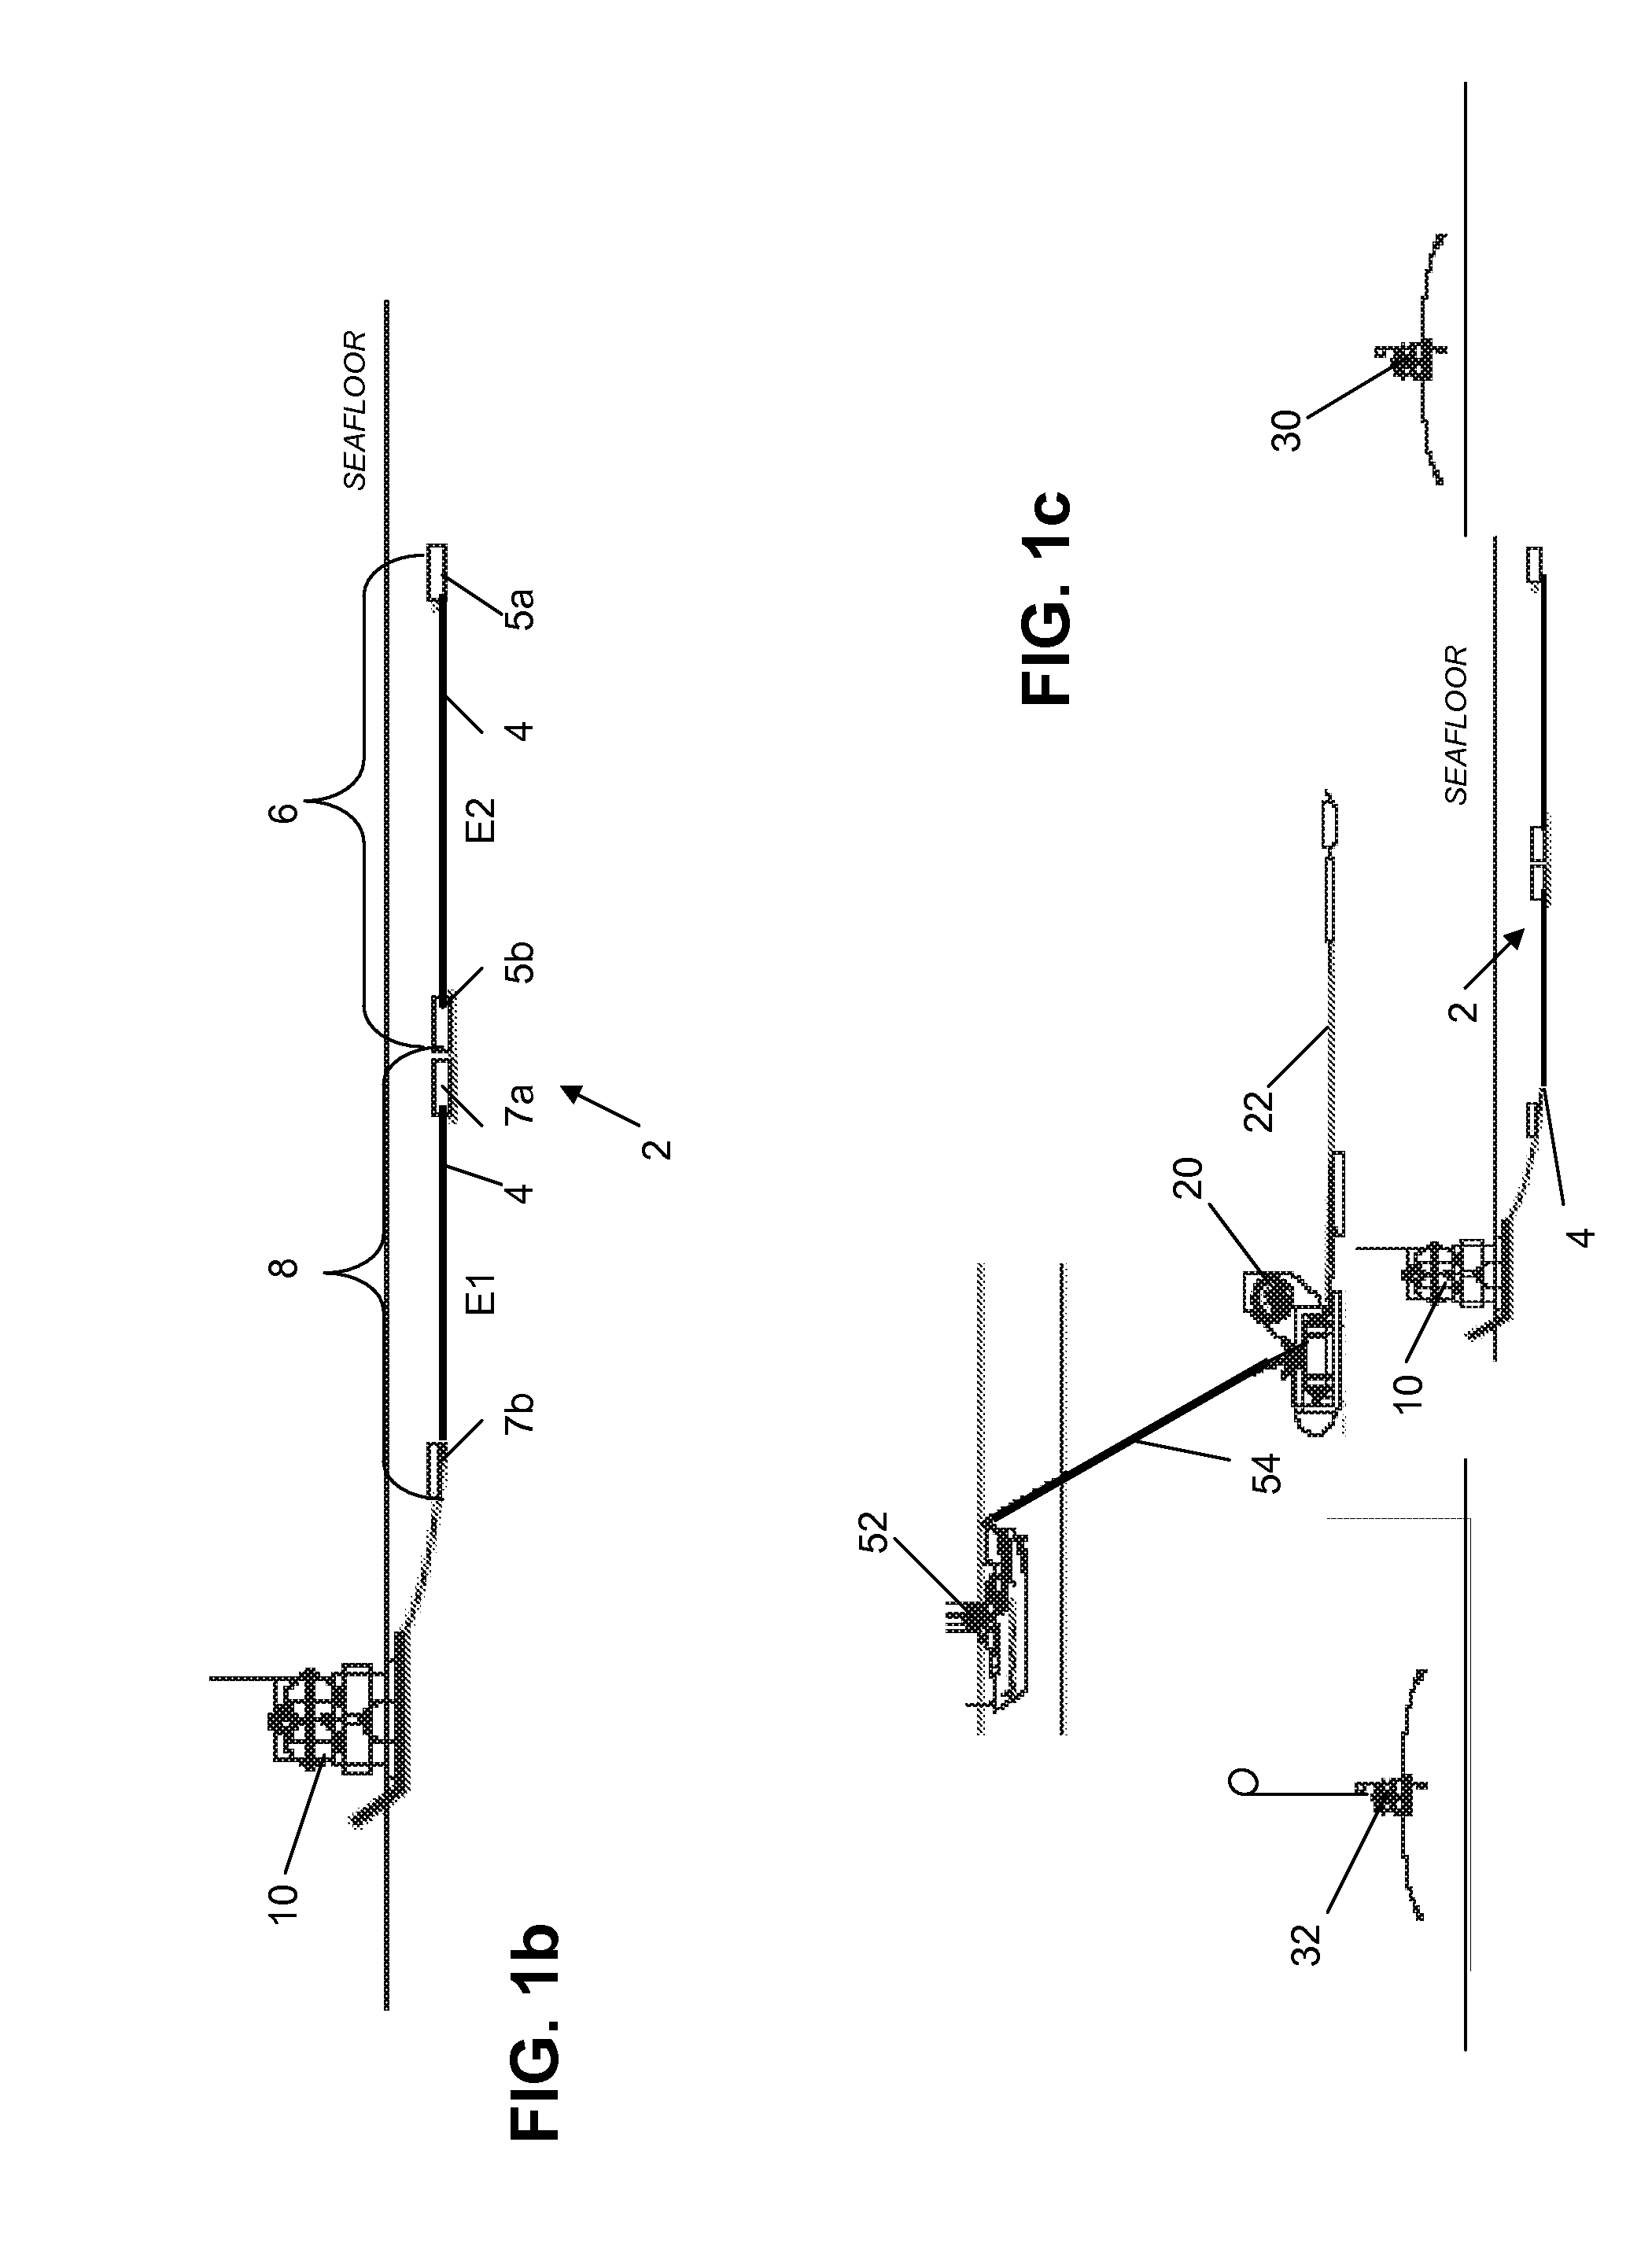 Method and System for Detecting and Mapping Hydrocarbon Reservoirs Using Electromagnetic Fields